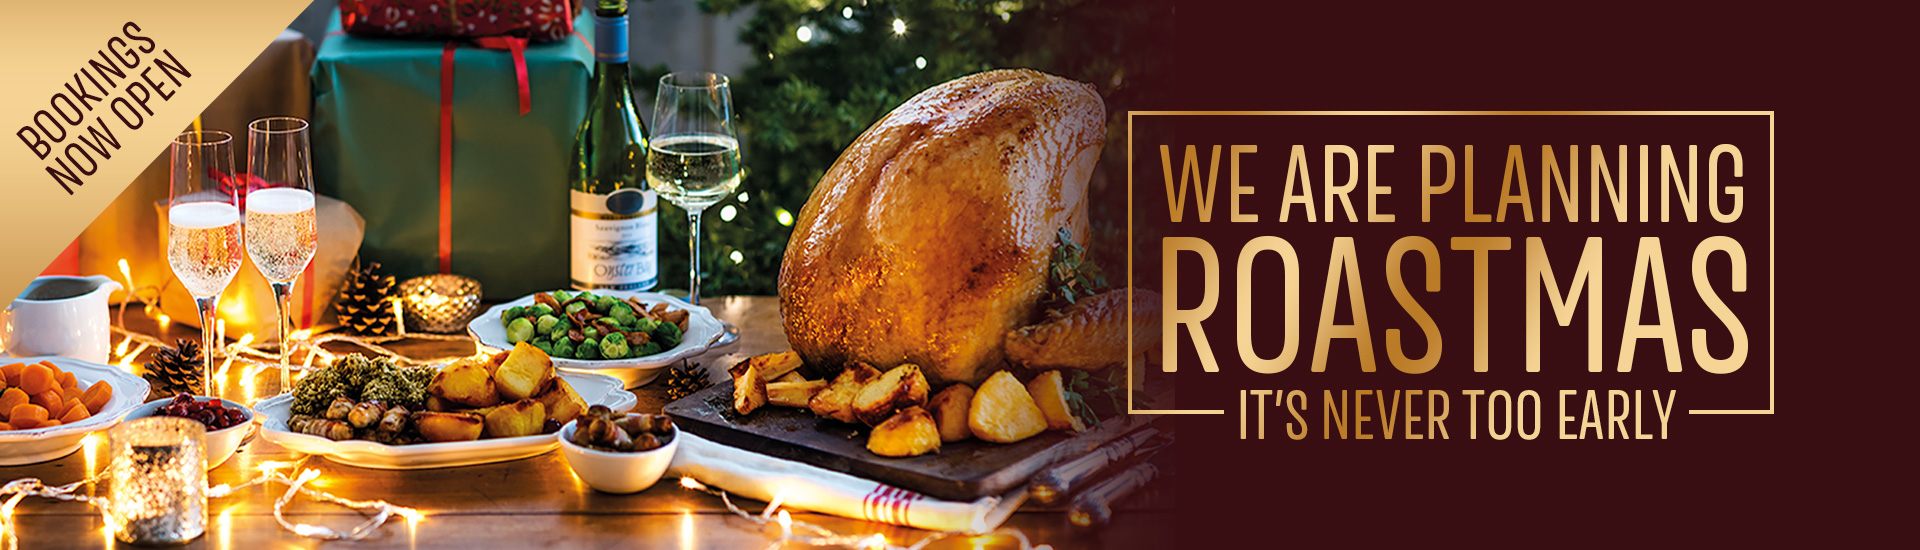 Christmas 2022 at your local Toby Carvery Burton | Home of the Roast